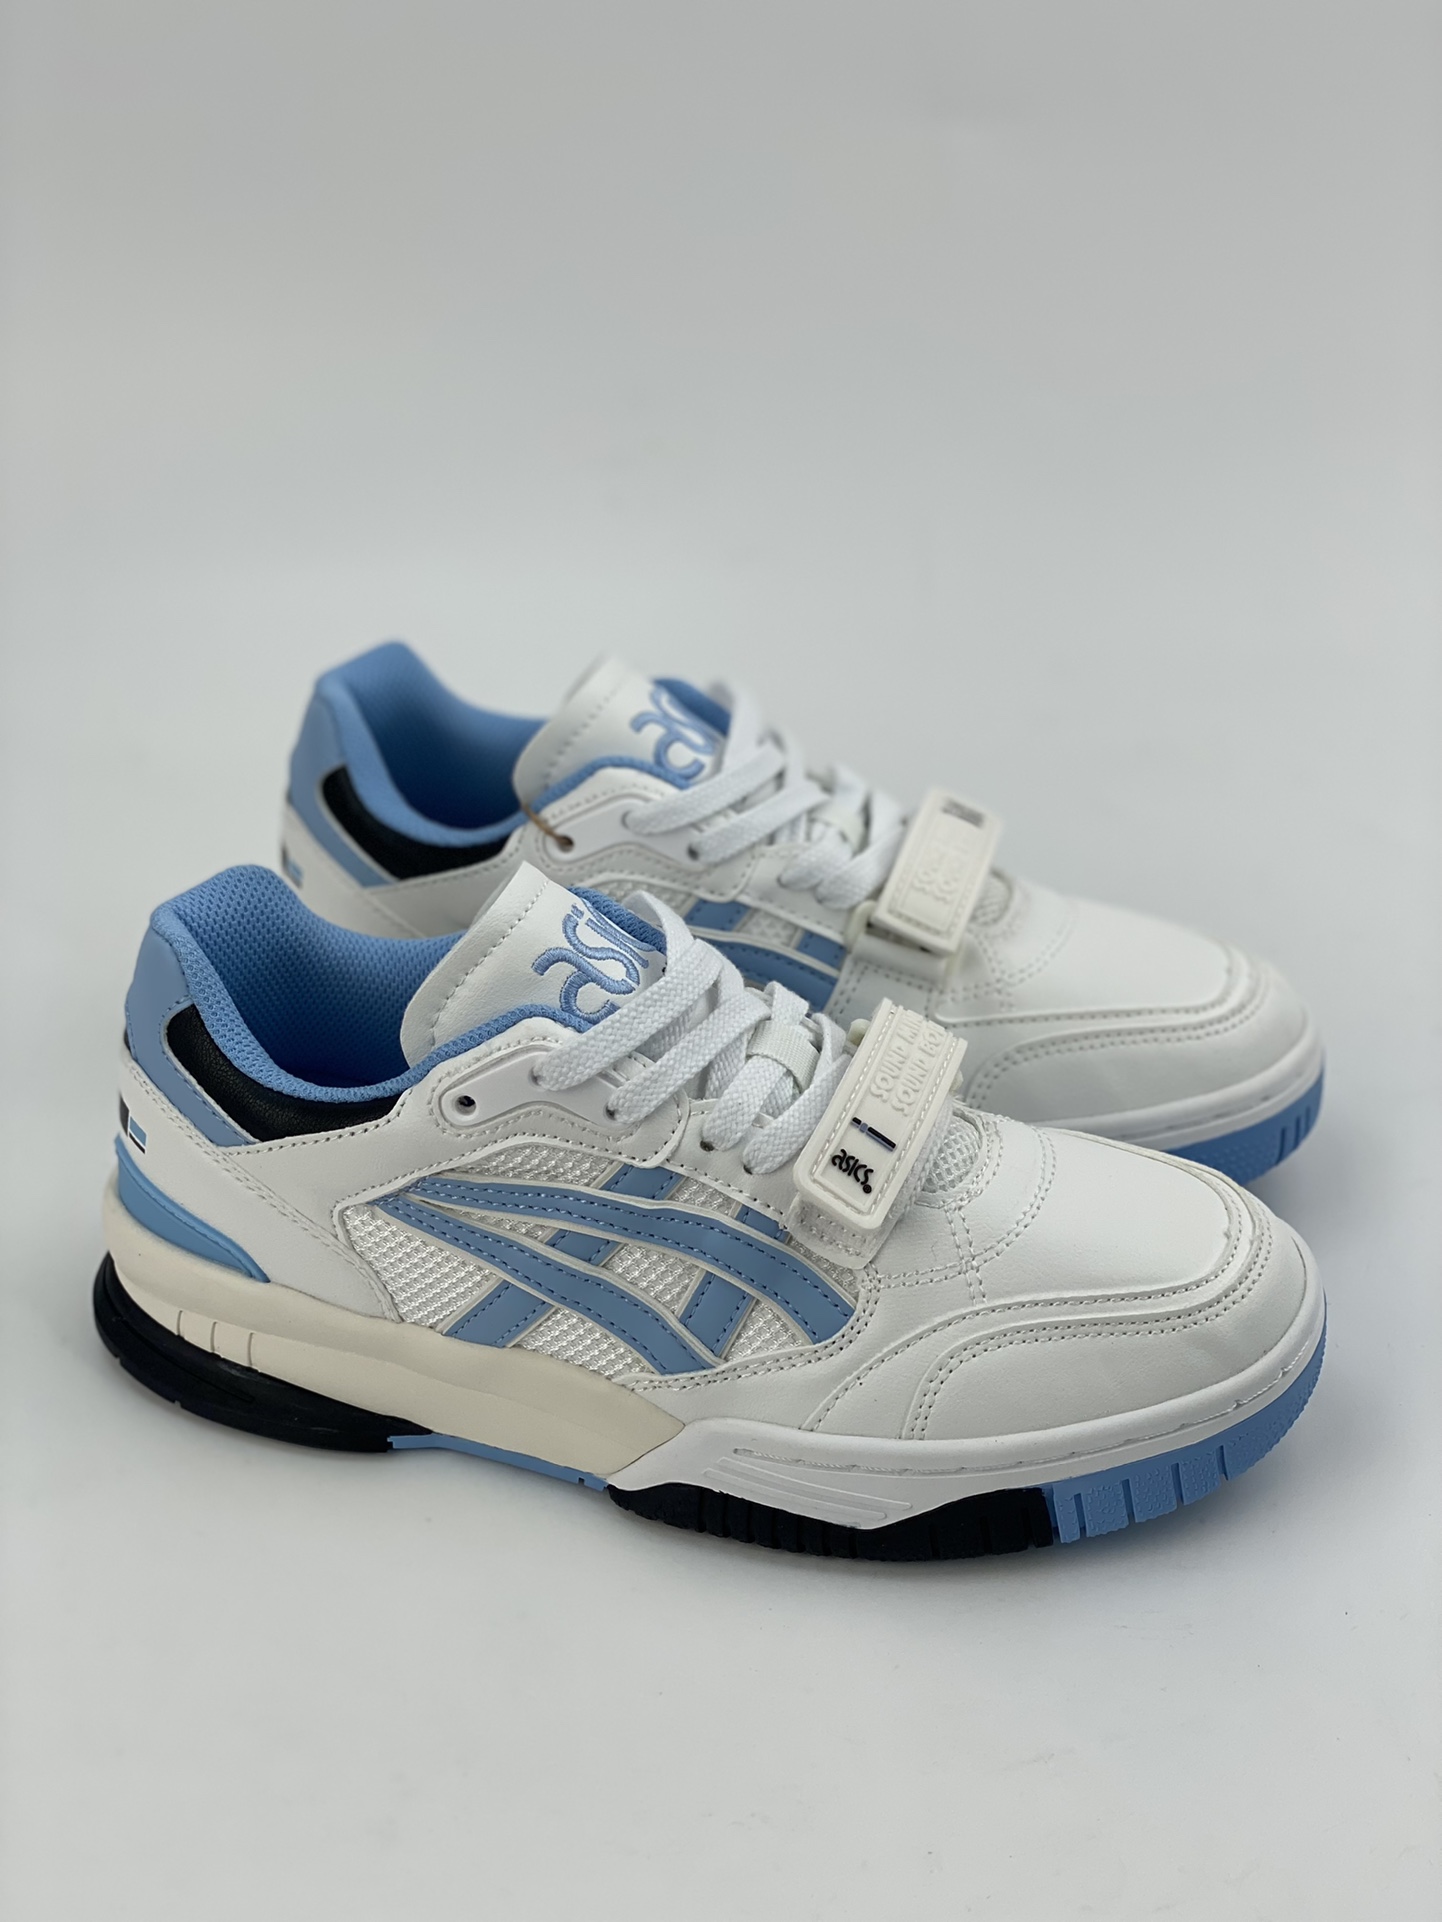 Asics Gel Spotlyte low V2 trend wear-resistant low-top retro basketball shoes 1203A258-103